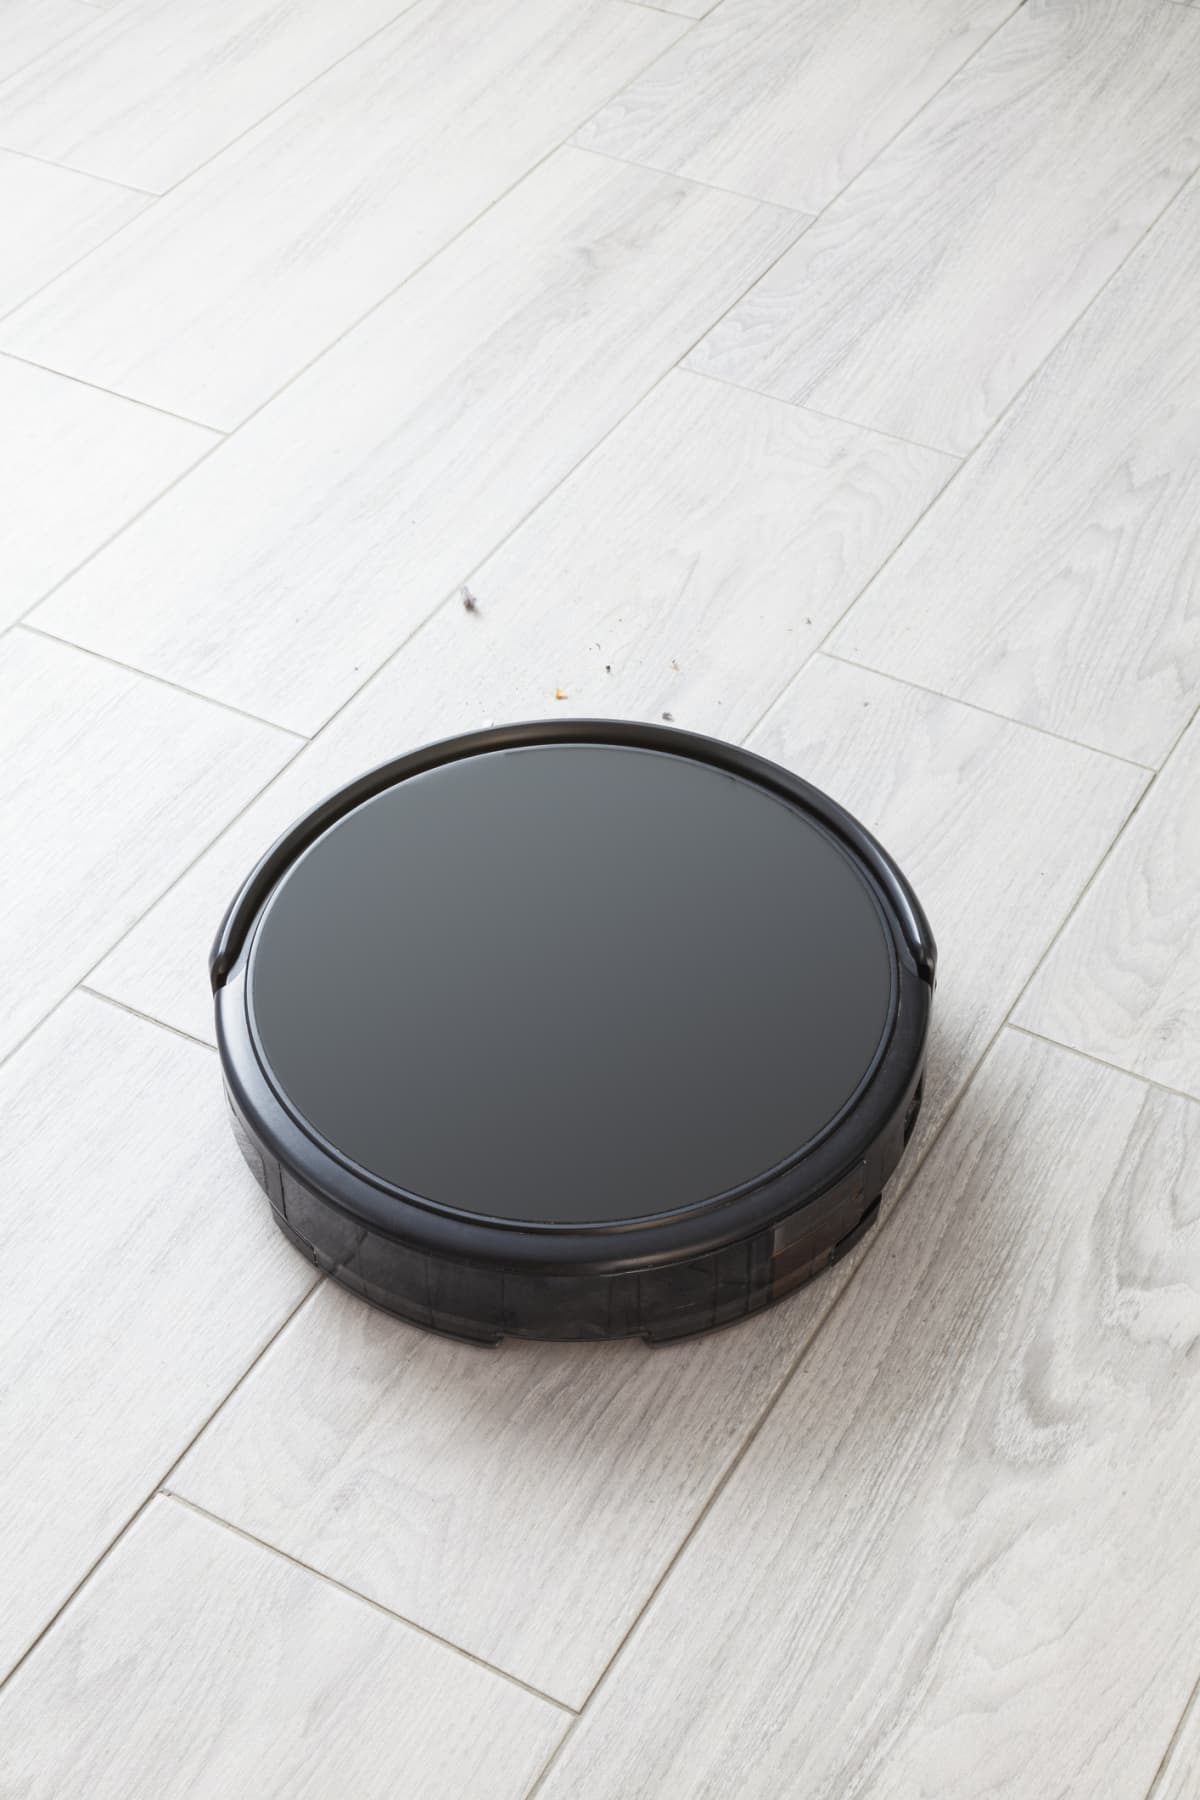 A black robot vacuum cleaner on a floor